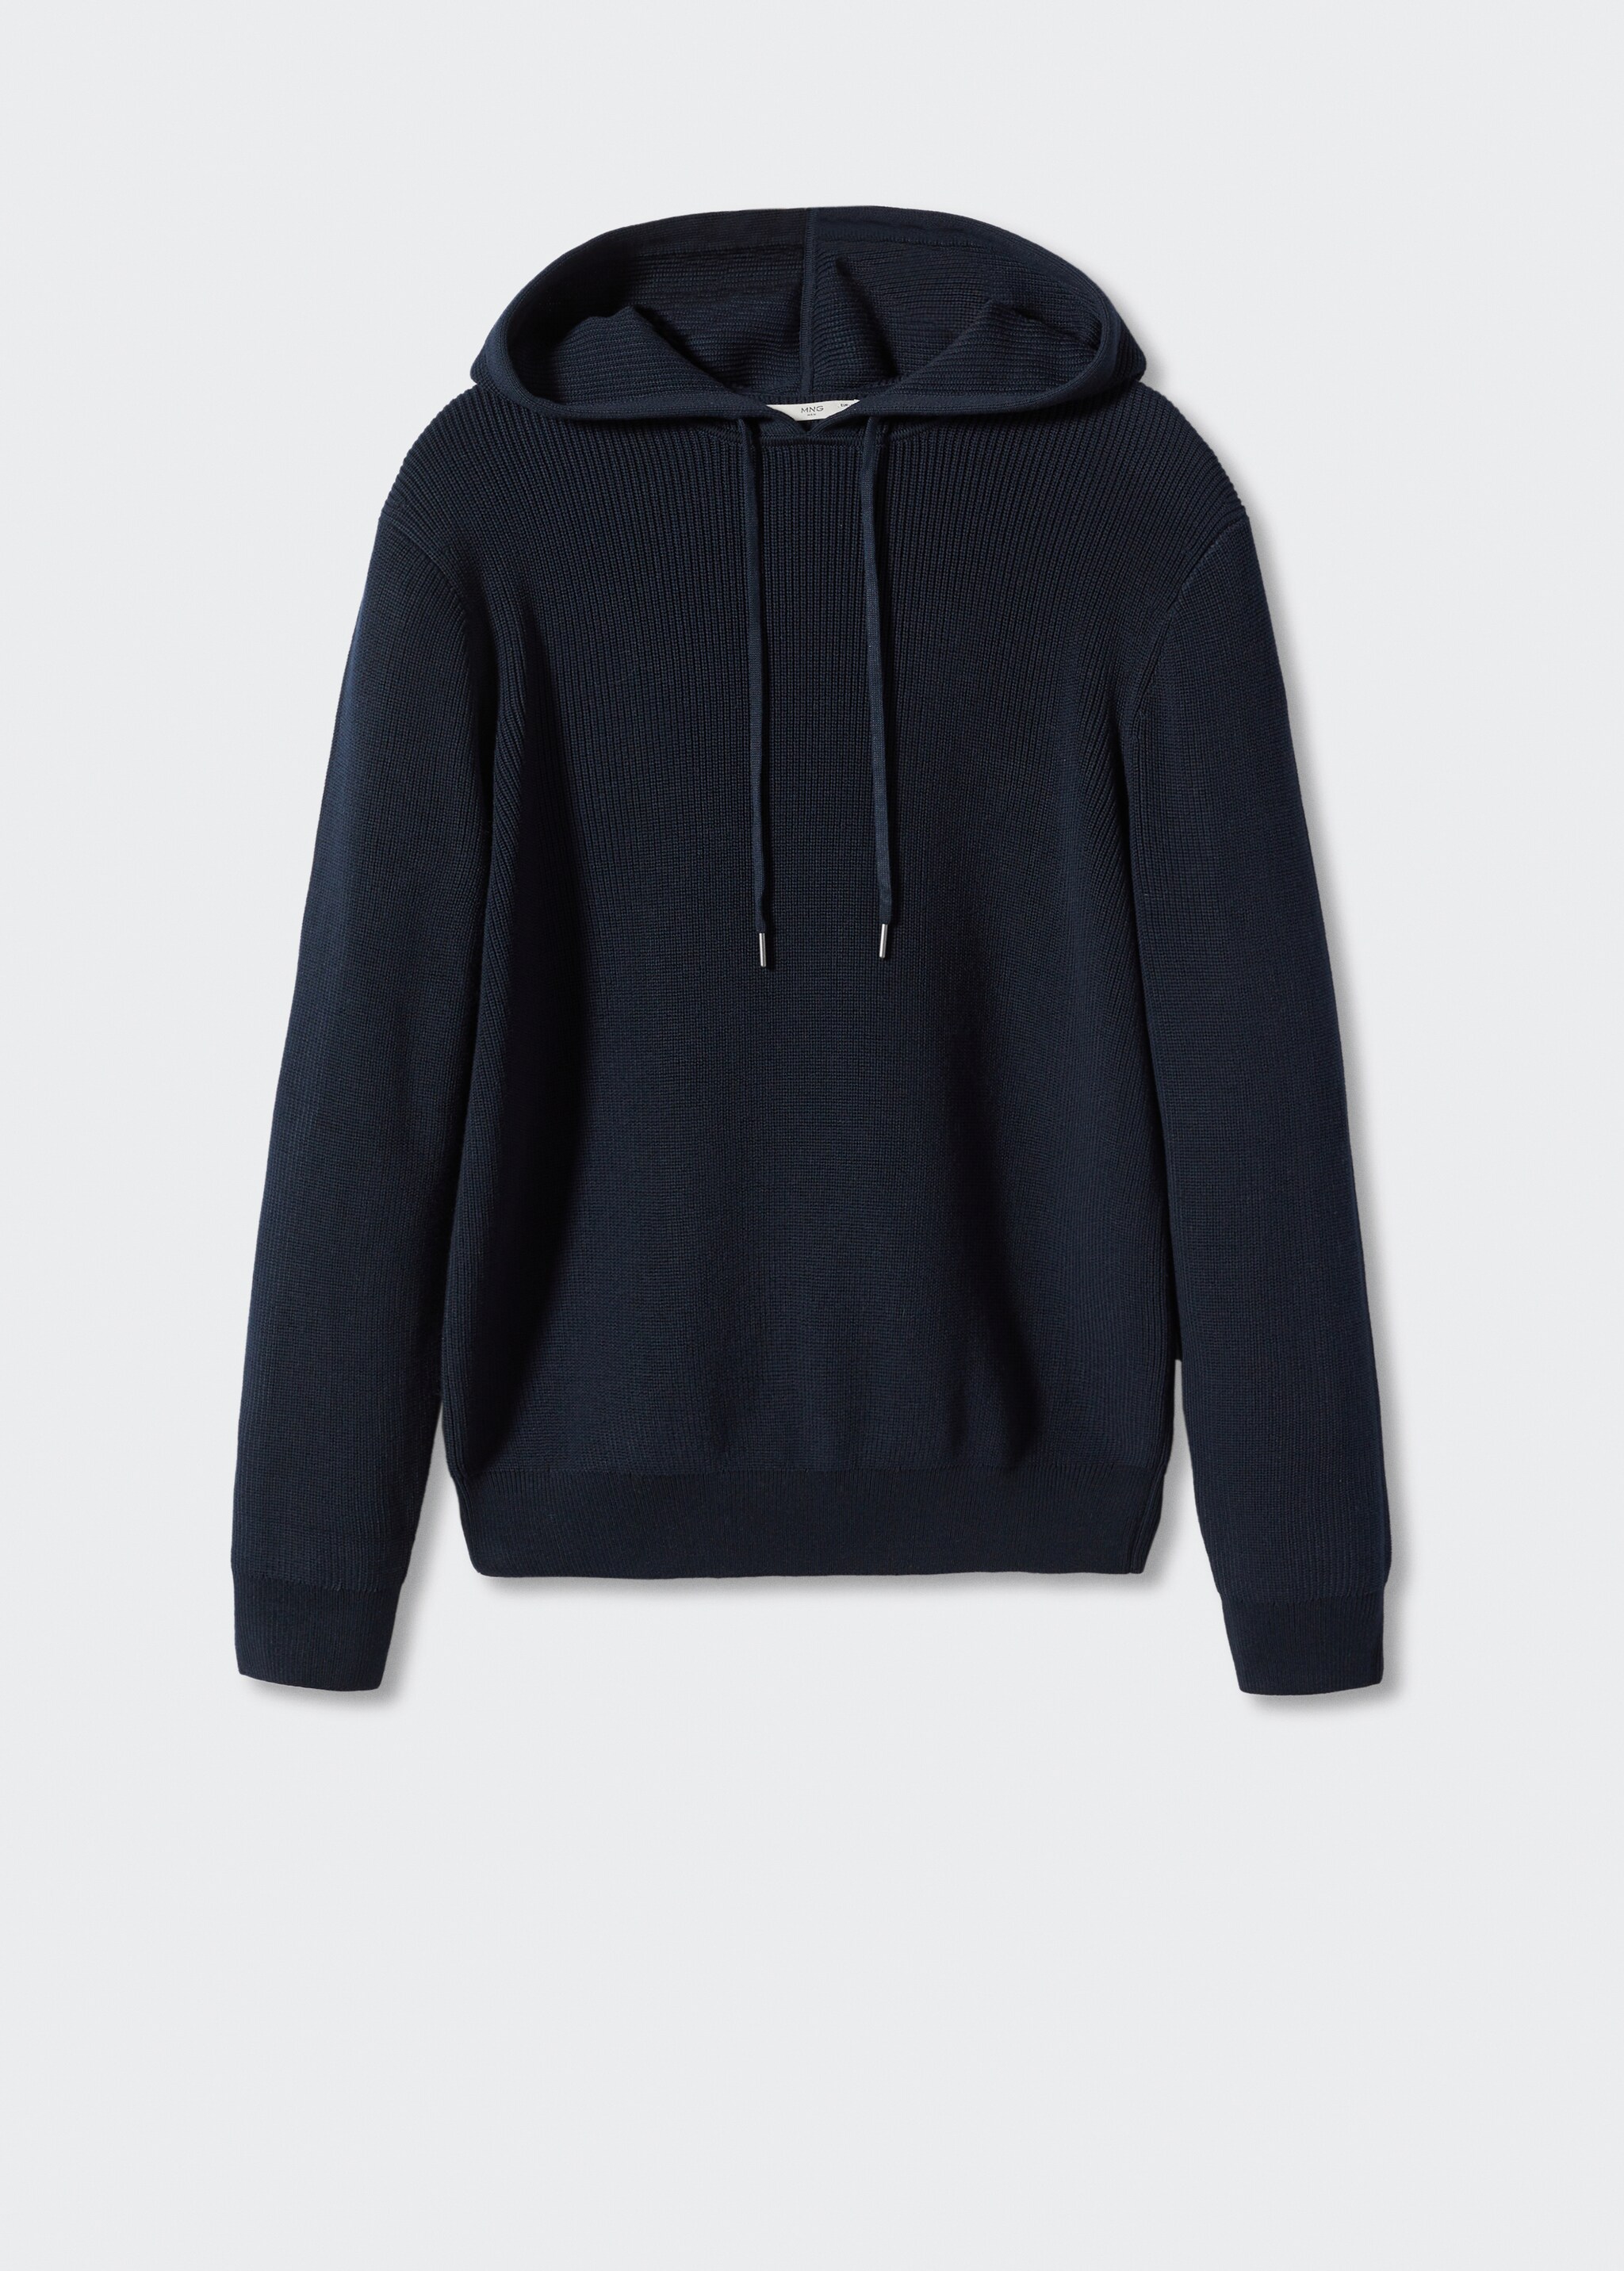 Structured hooded sweater - Article without model